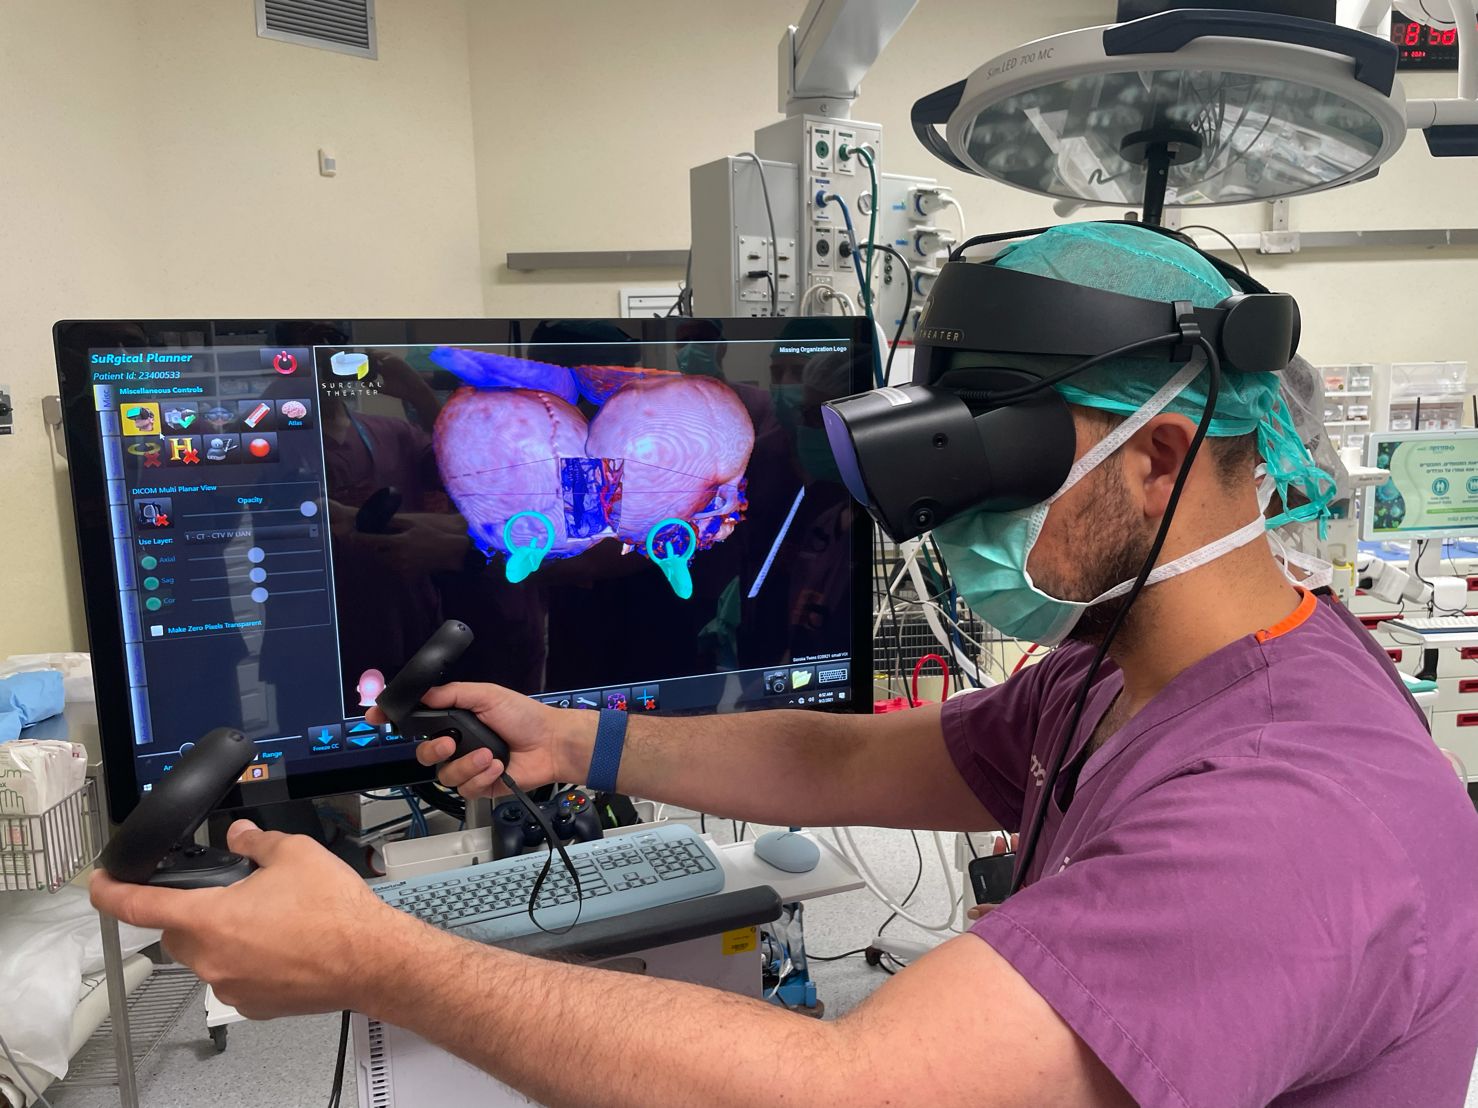 Dr. Gideon simulates the surgery using VR.